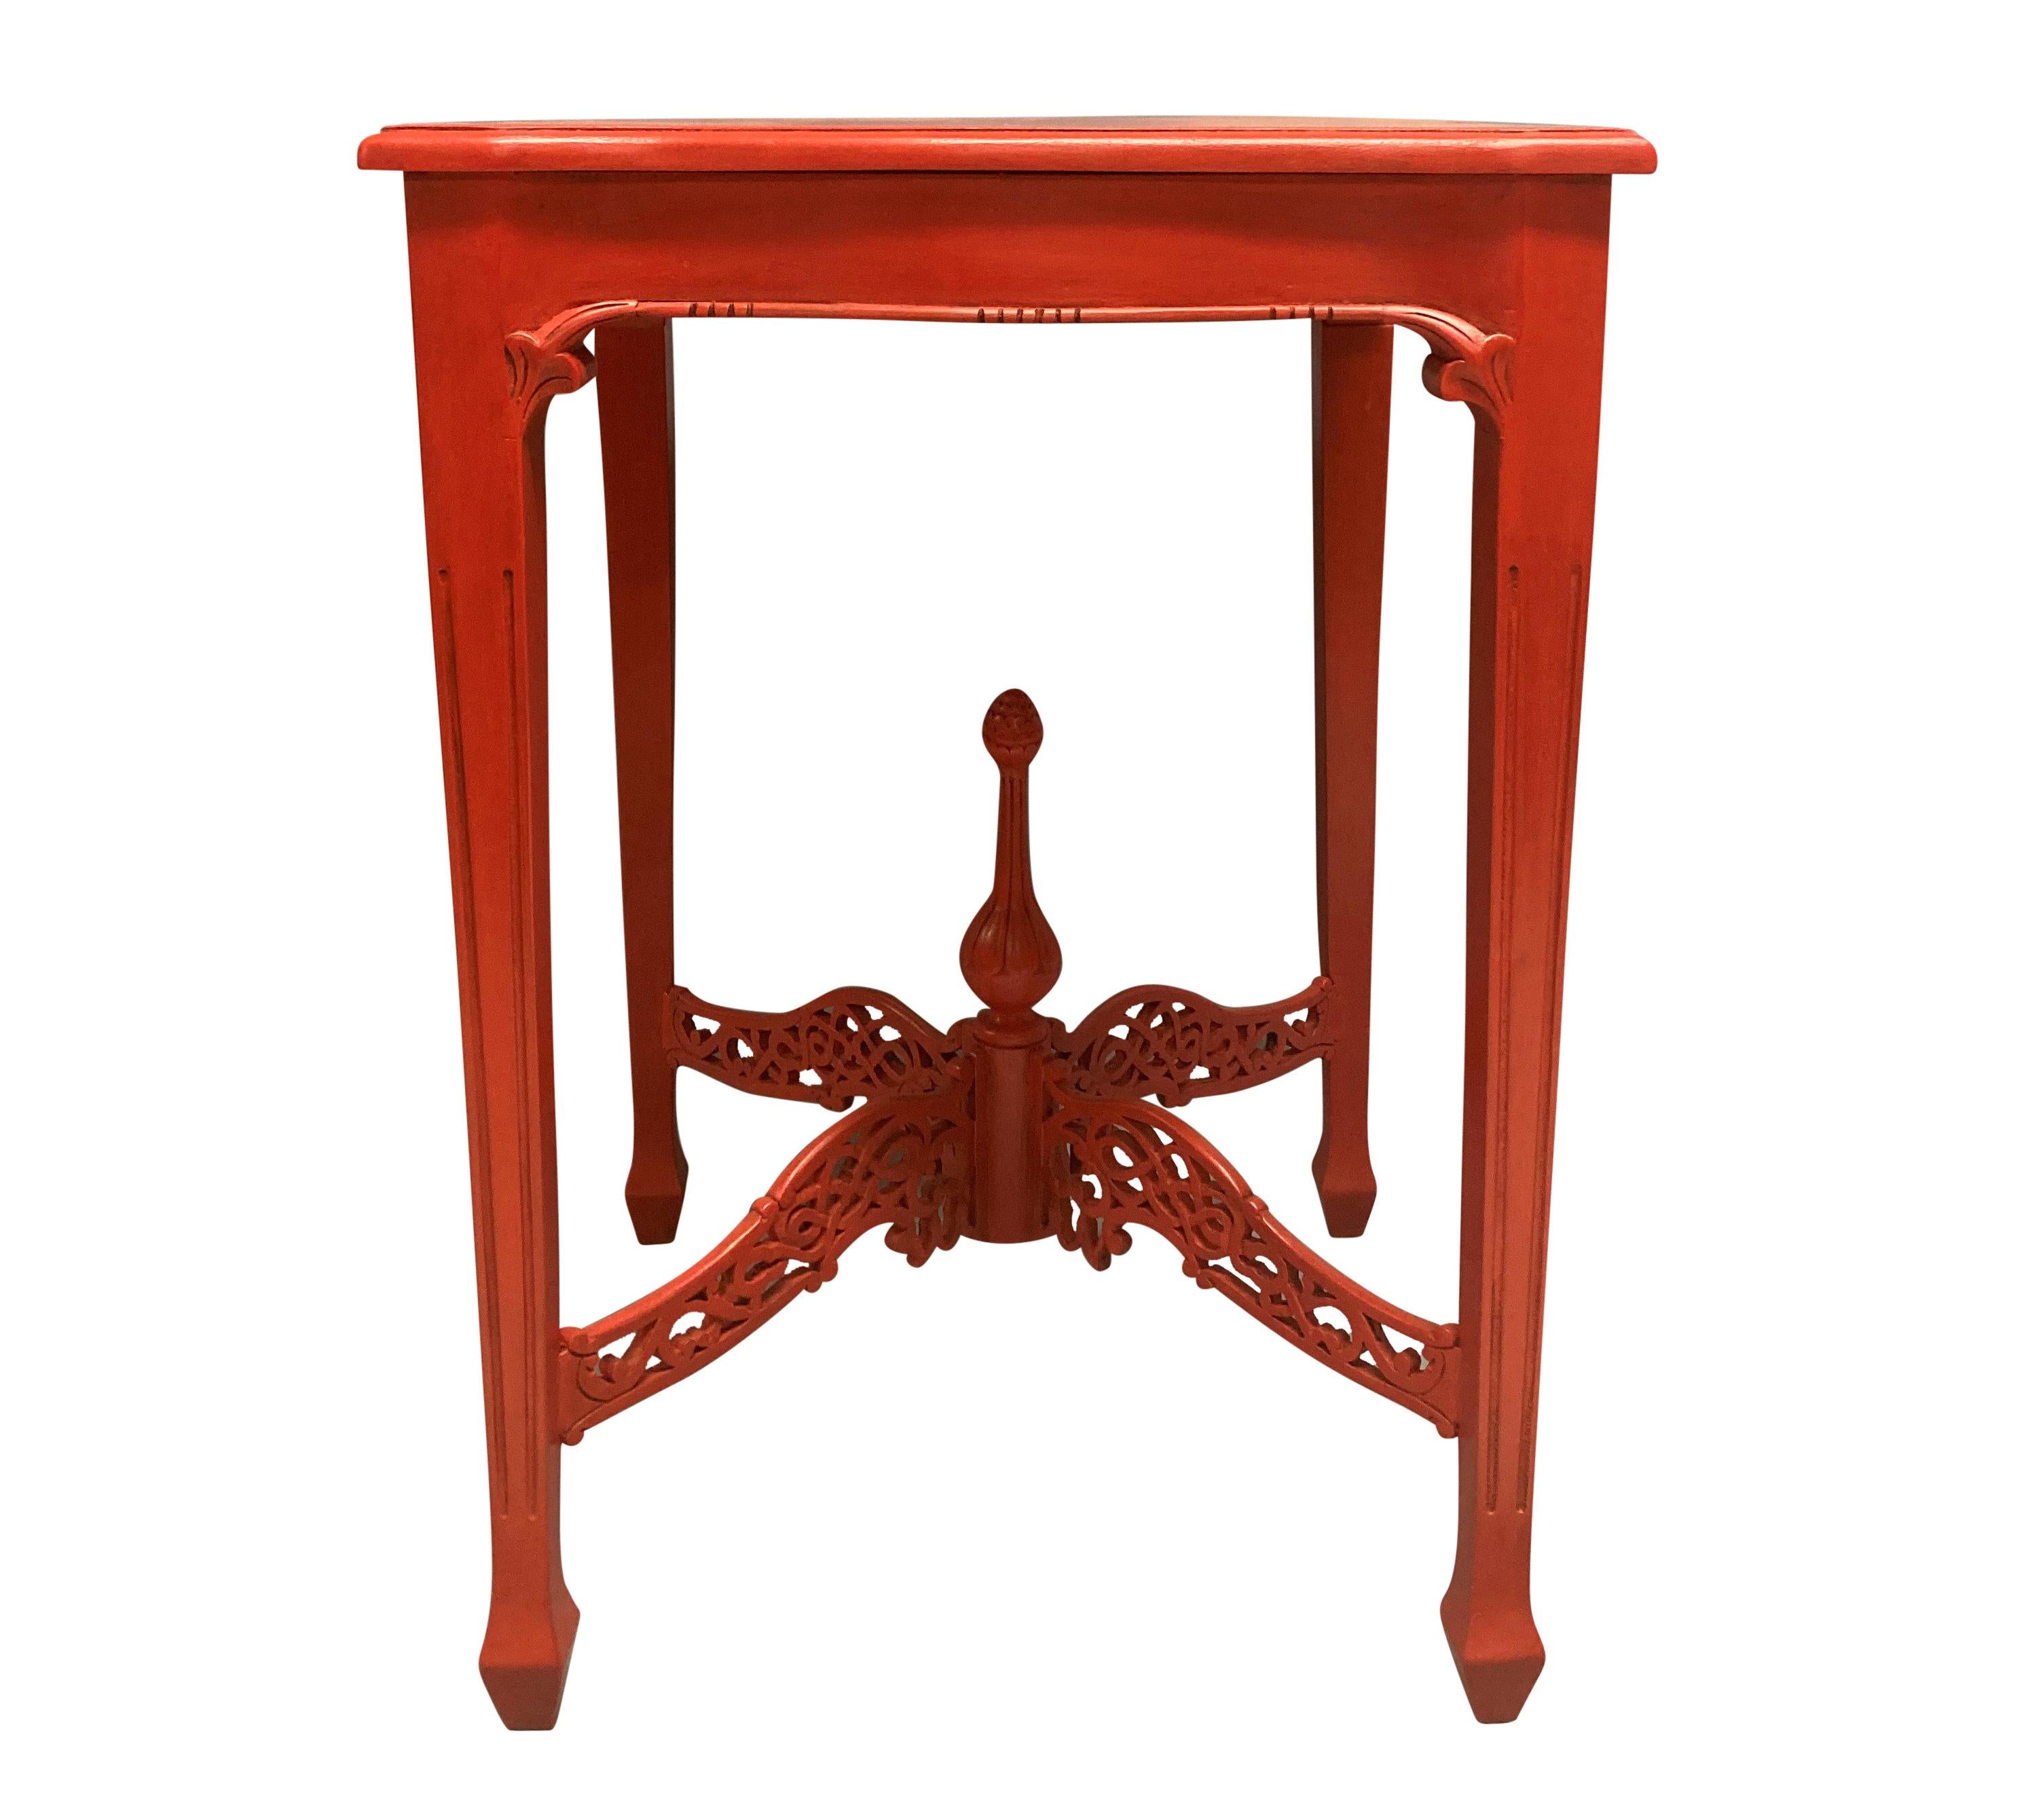 A pair of scarlet English Chippendale style side tables, with fretwork stretchers and finial.